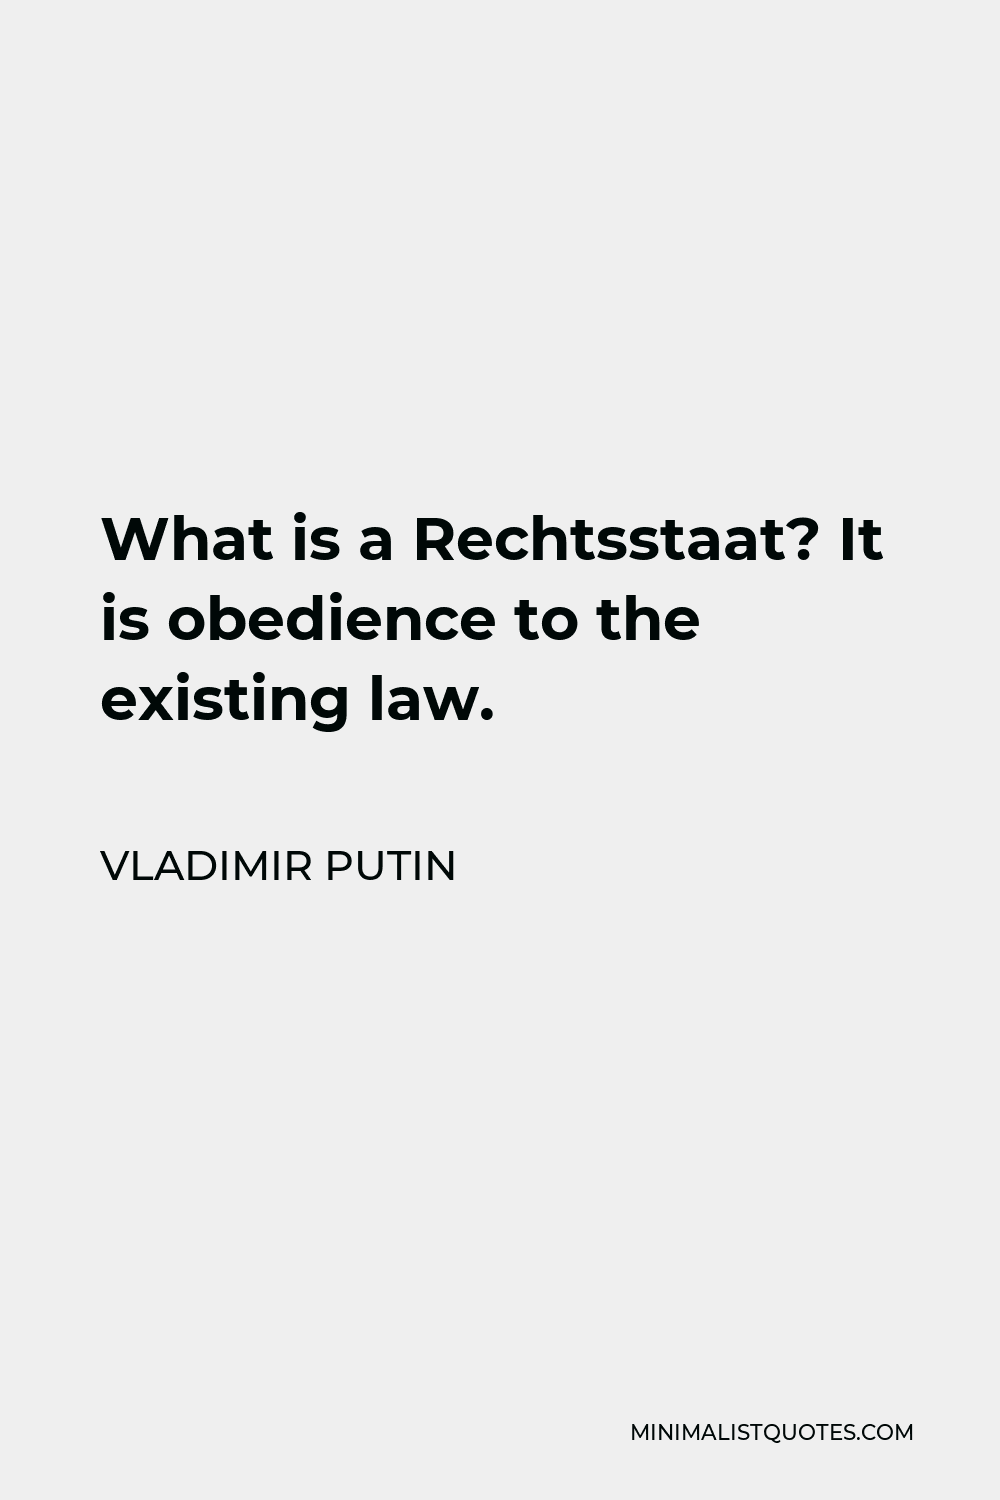 Vladimir Putin Quote - What is a Rechtsstaat? It is obedience to the existing law.